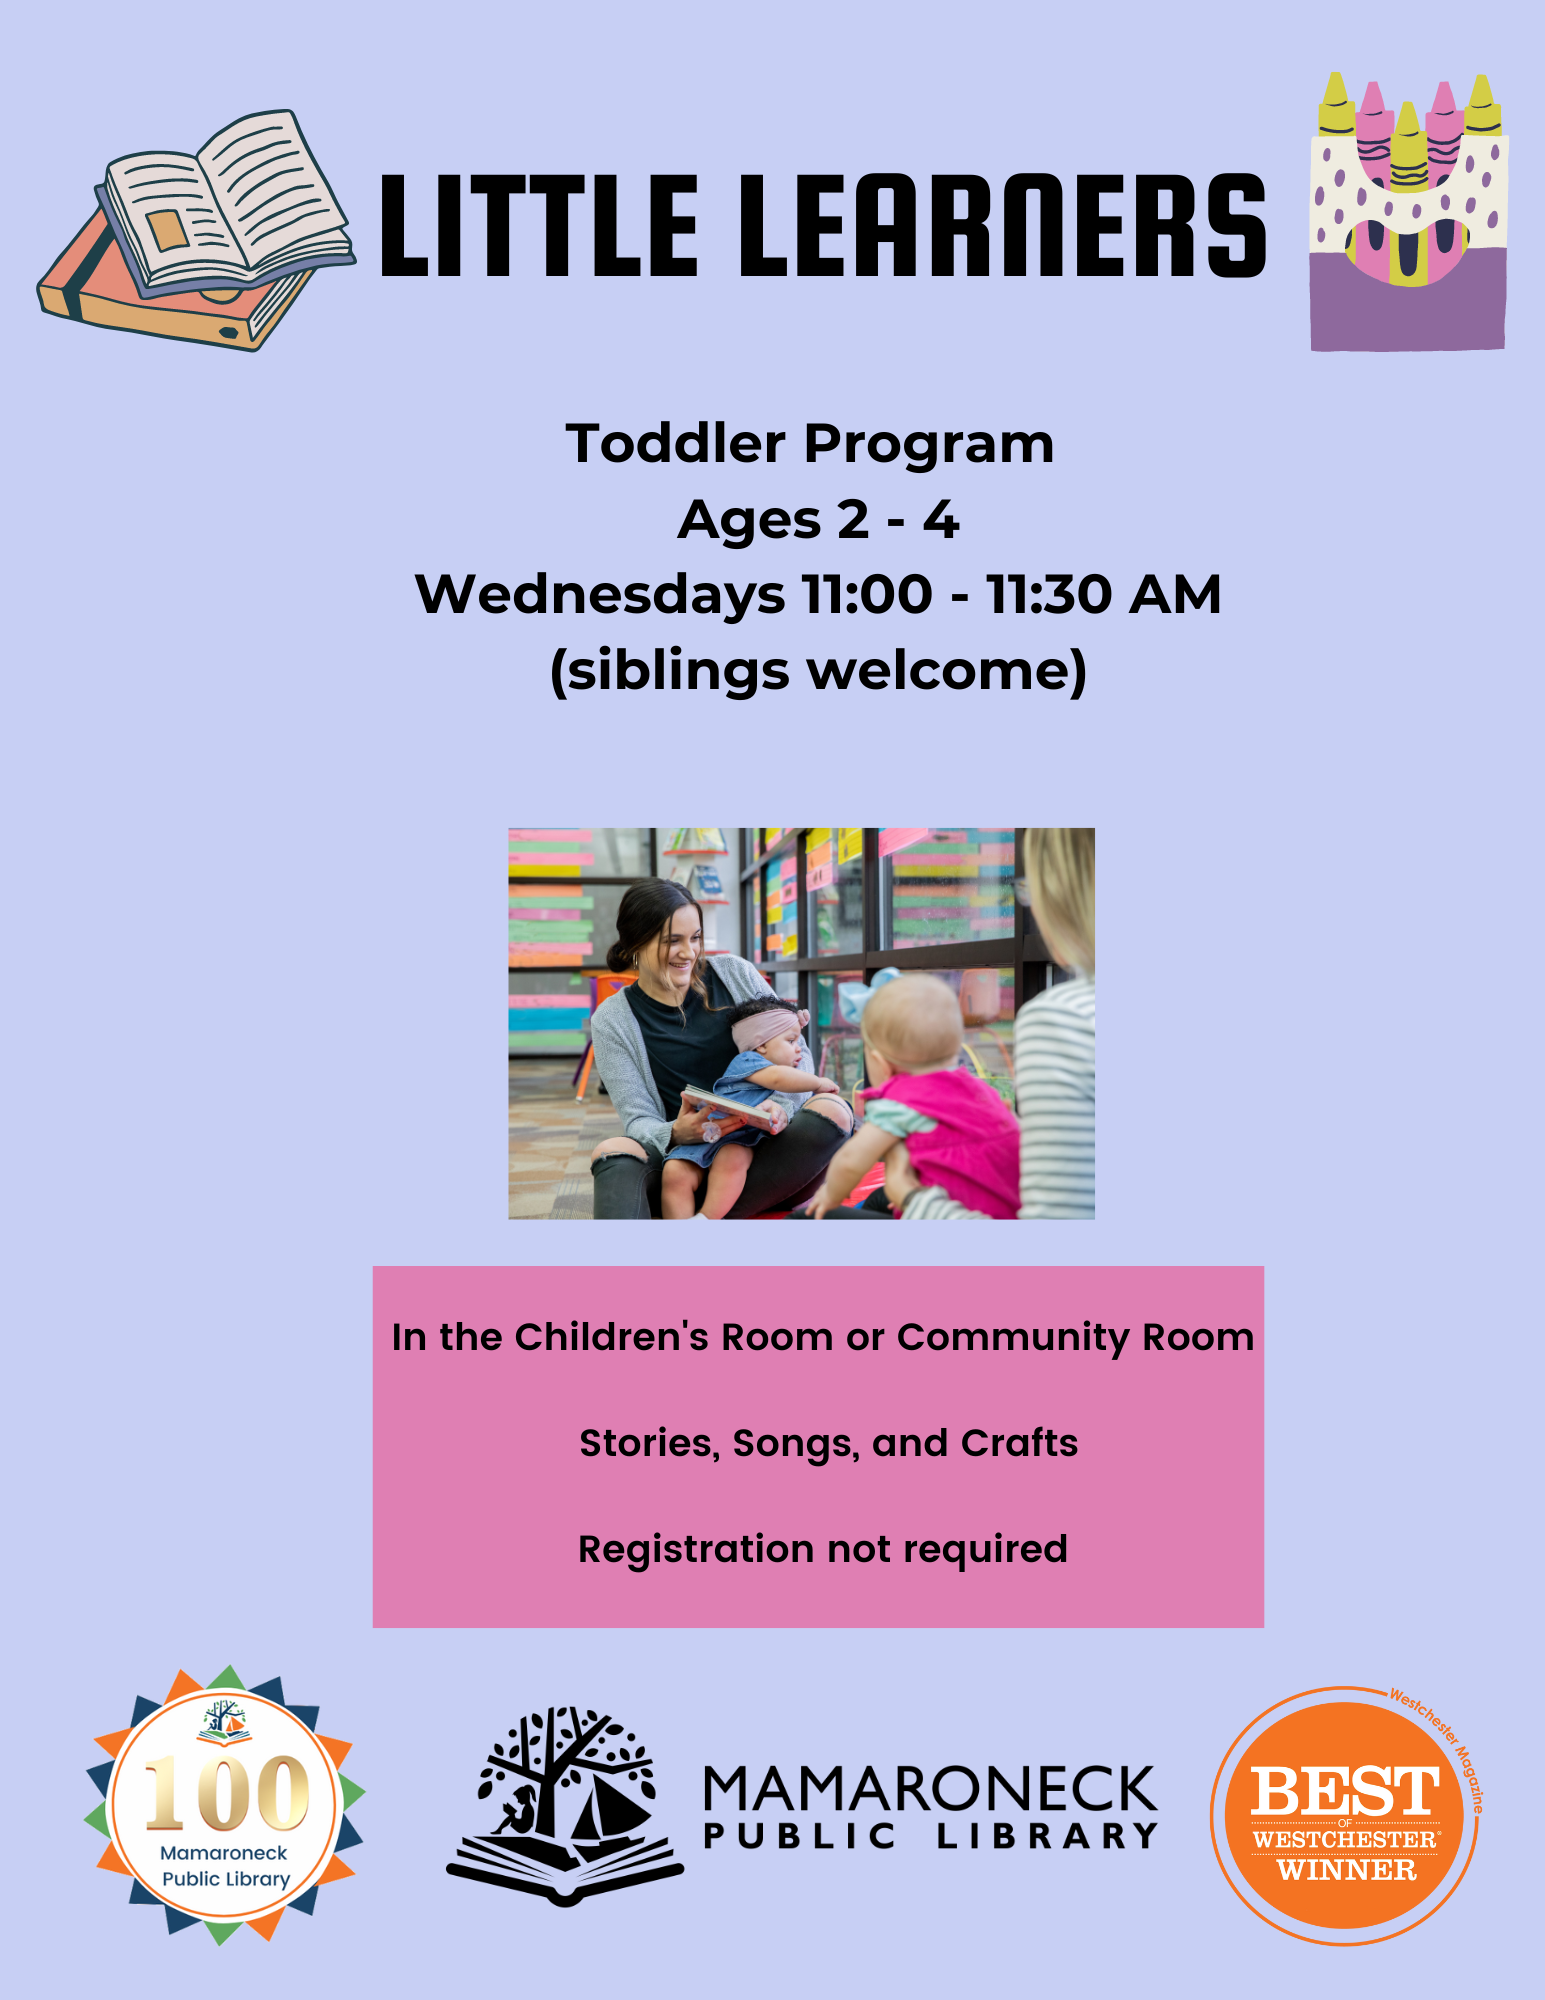 Little Learners every Wednesday - 11-11:30am - Toddlers age 2-4